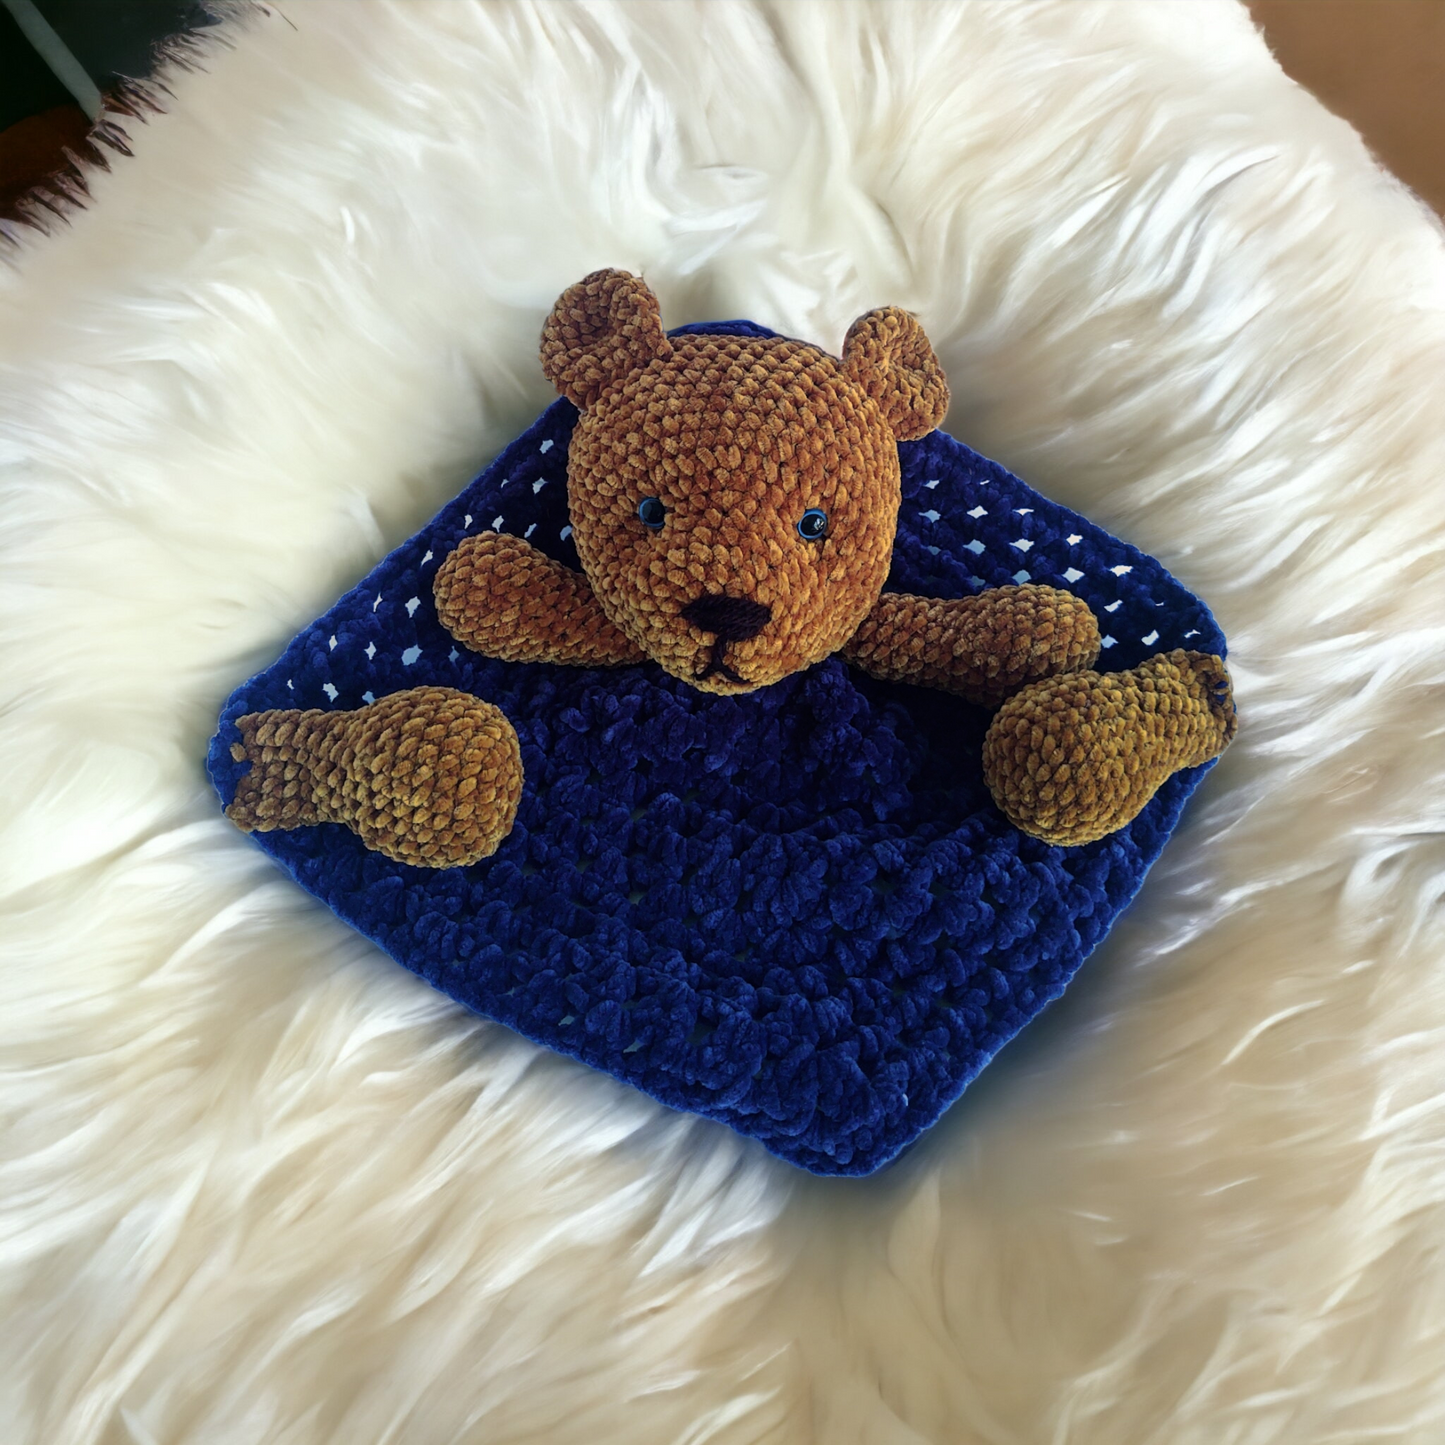 Dave the Anti-Anxiety Bear Lovey - Your Bedtime Buddy and Soft Security Blanket